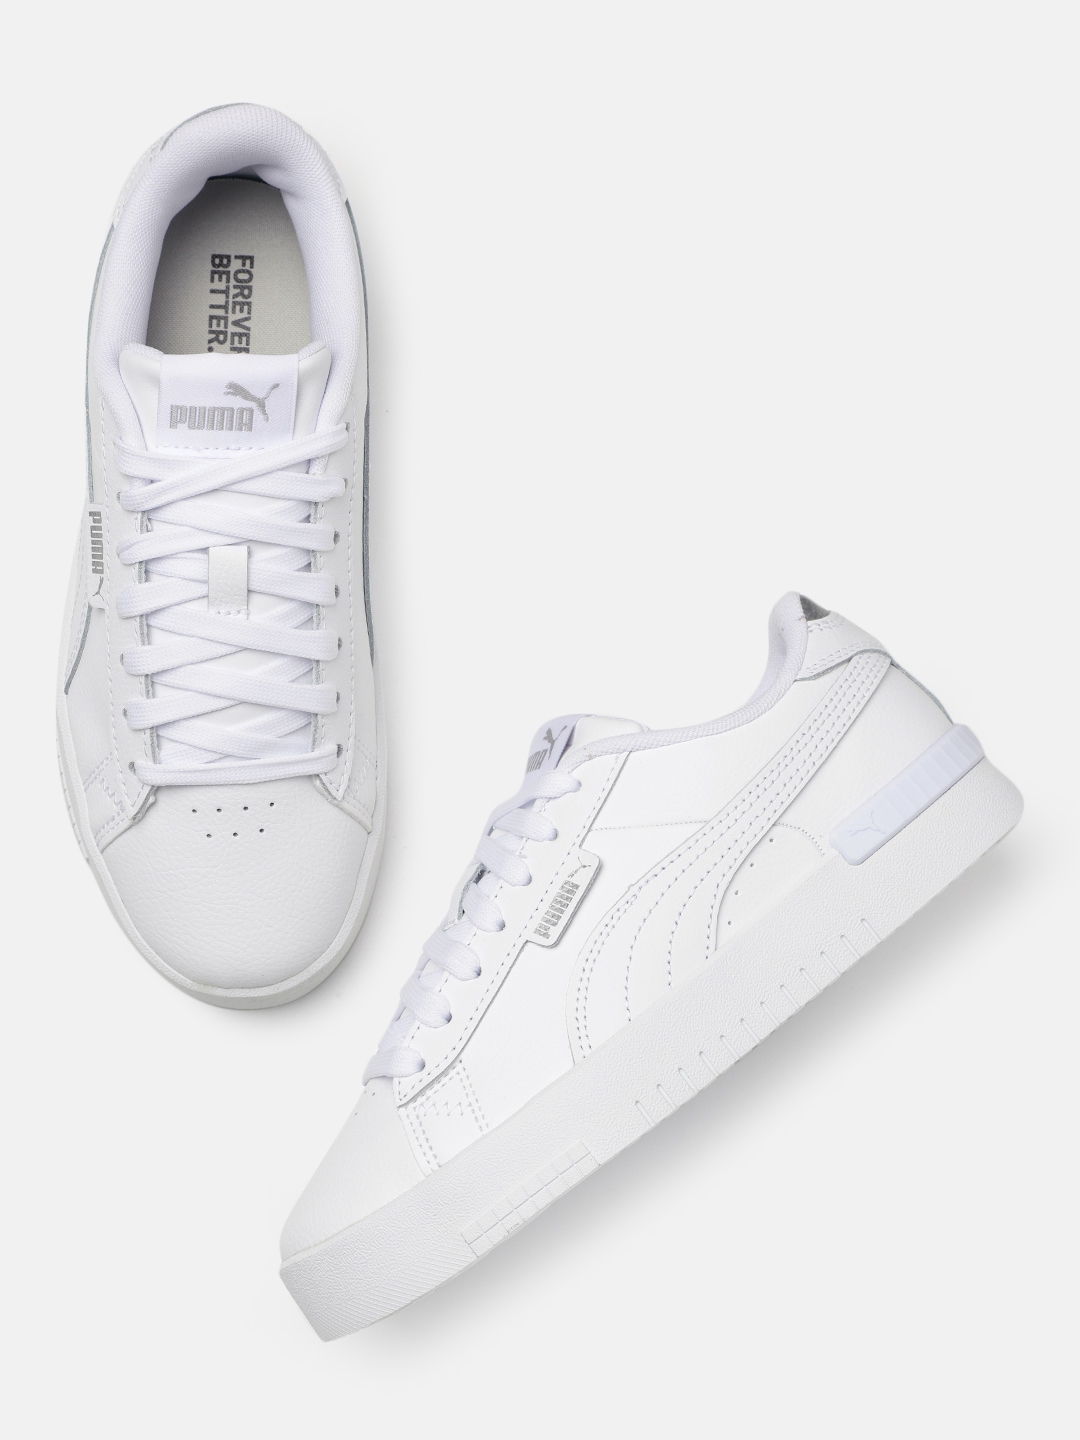 Puma Women White Leather Sustainable Sneakers